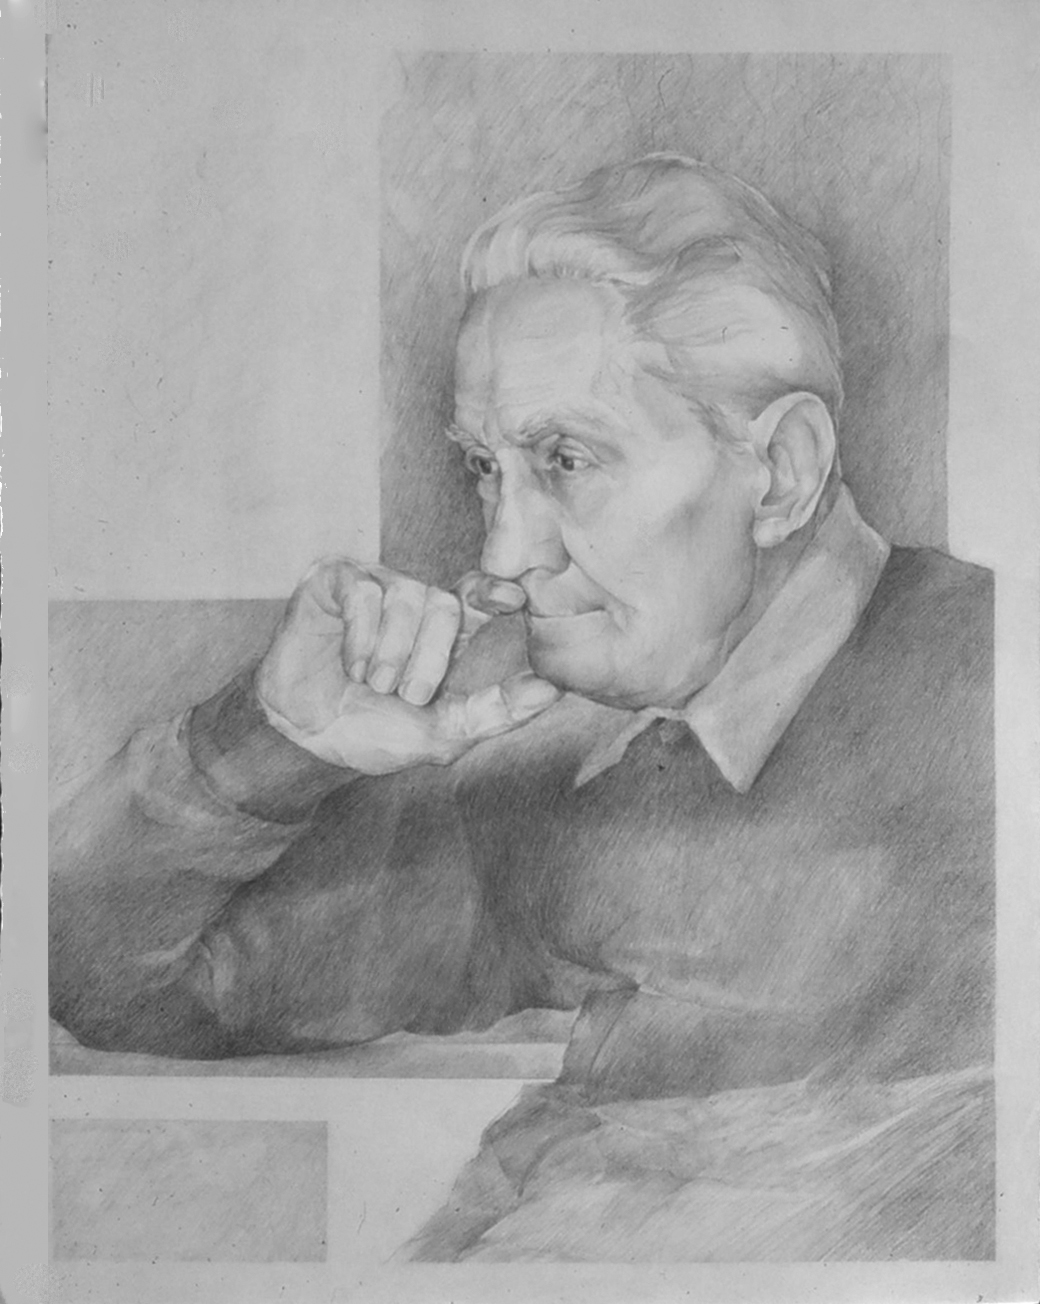 5dw - Of The Cross- pencil on paper, 24x36 in., 1978.jpg